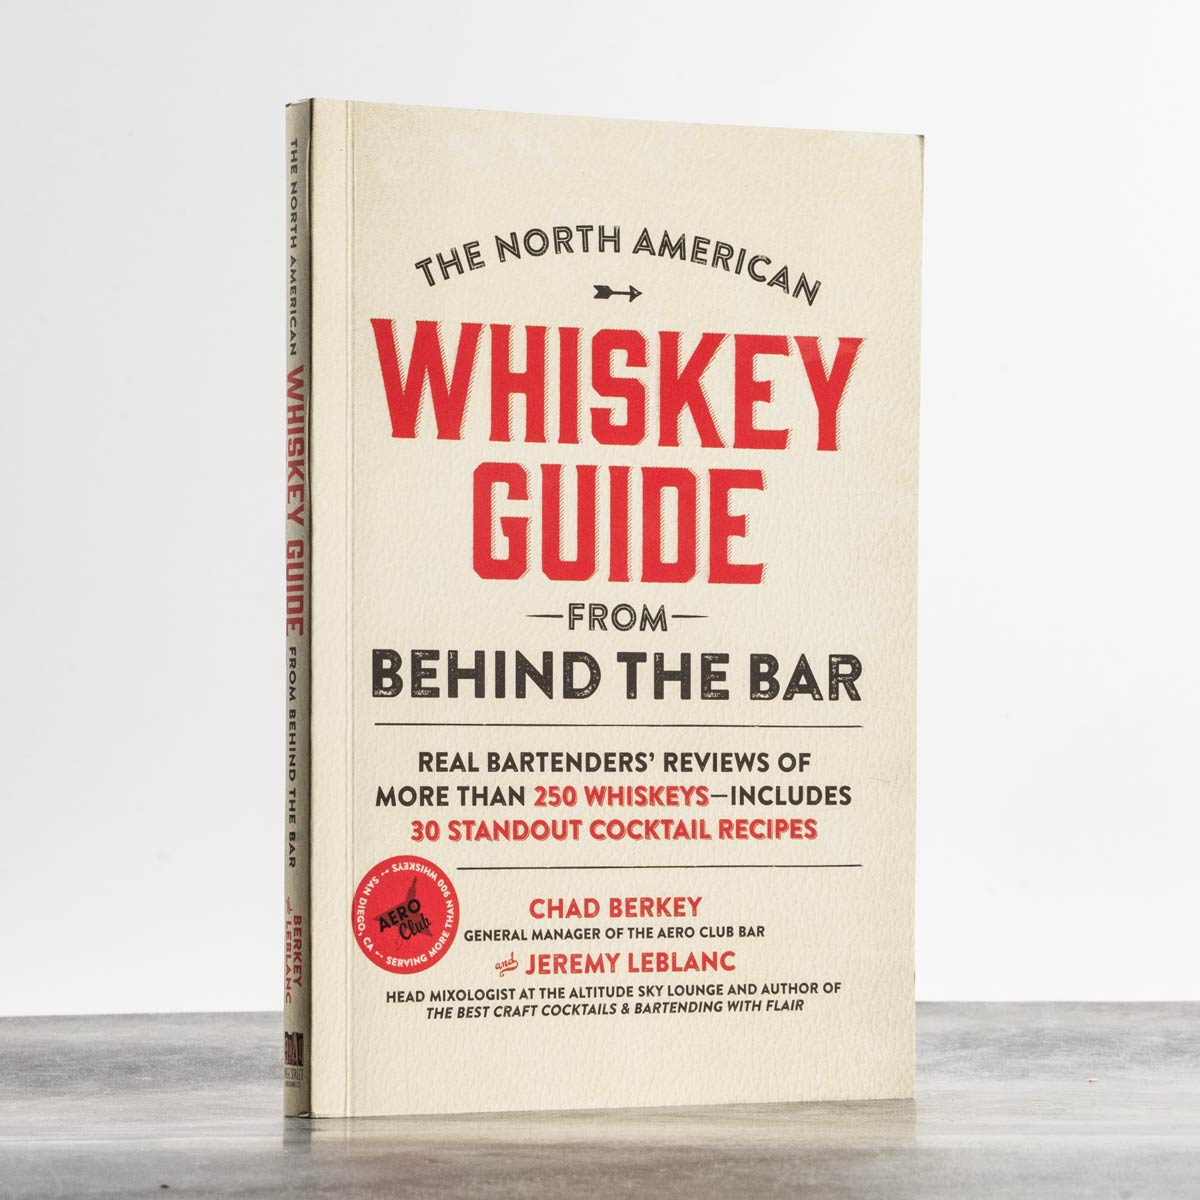 The North American Whiskey Guide